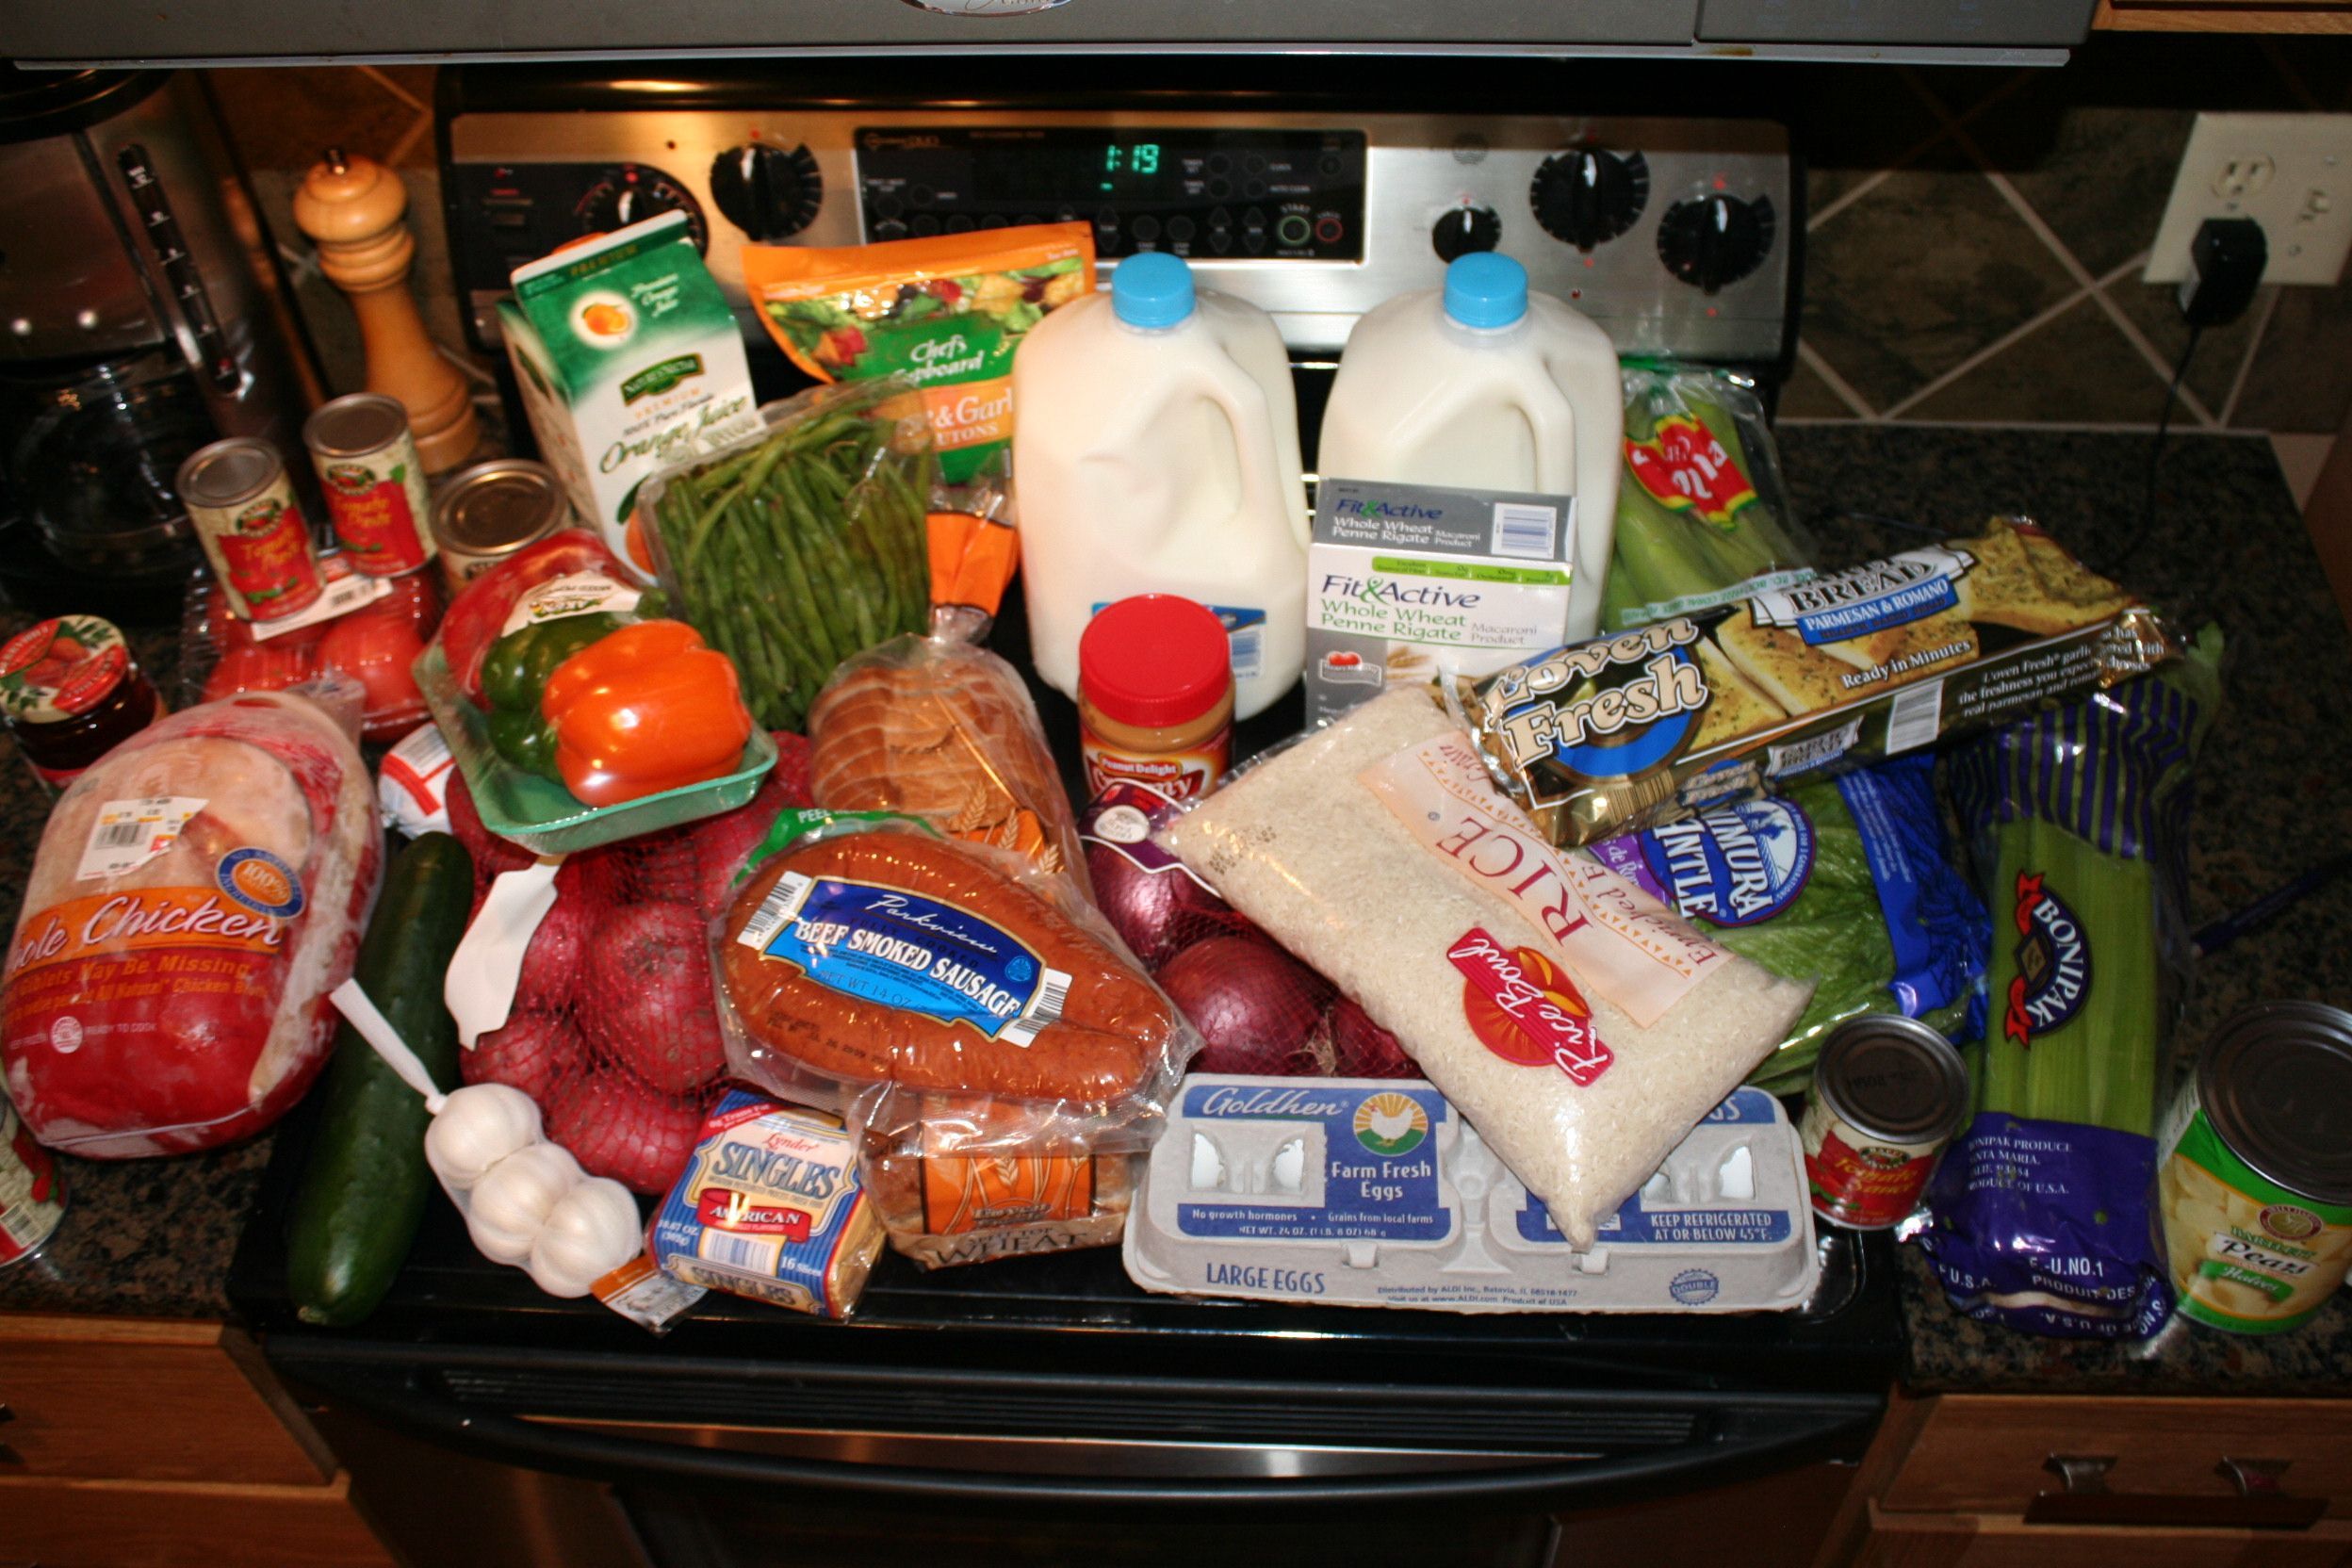 Aldi shopping list and meal plan for feeding a family of 4 on less than $50 a we